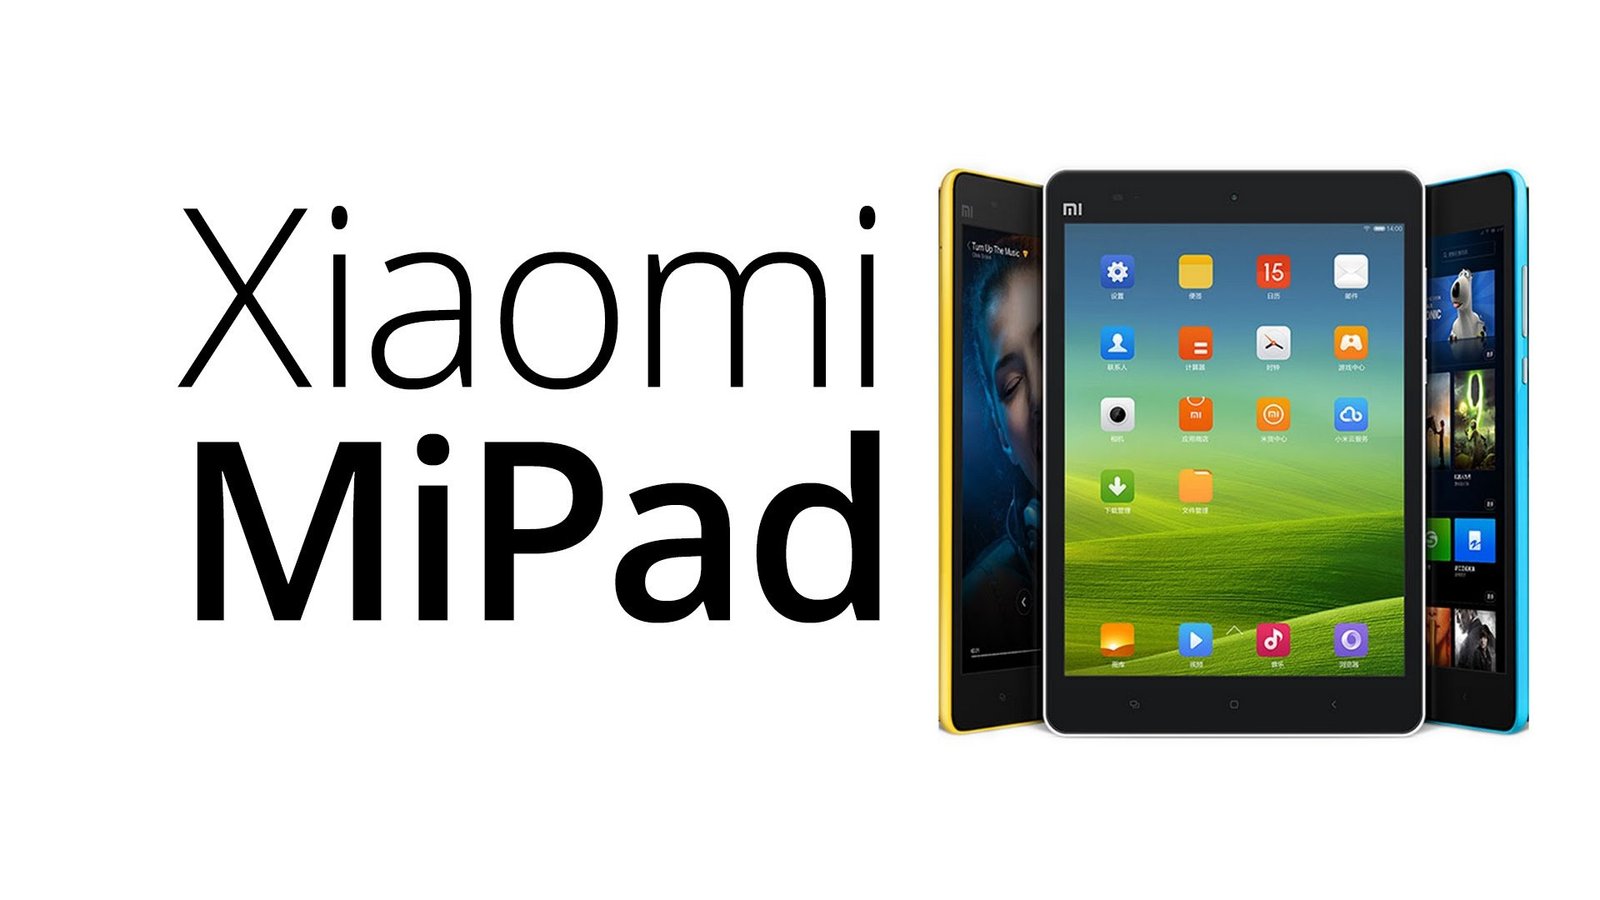 Xiaomi Mi Pad now available for purchase in India exclusively on Flipkart at Rs 12,999